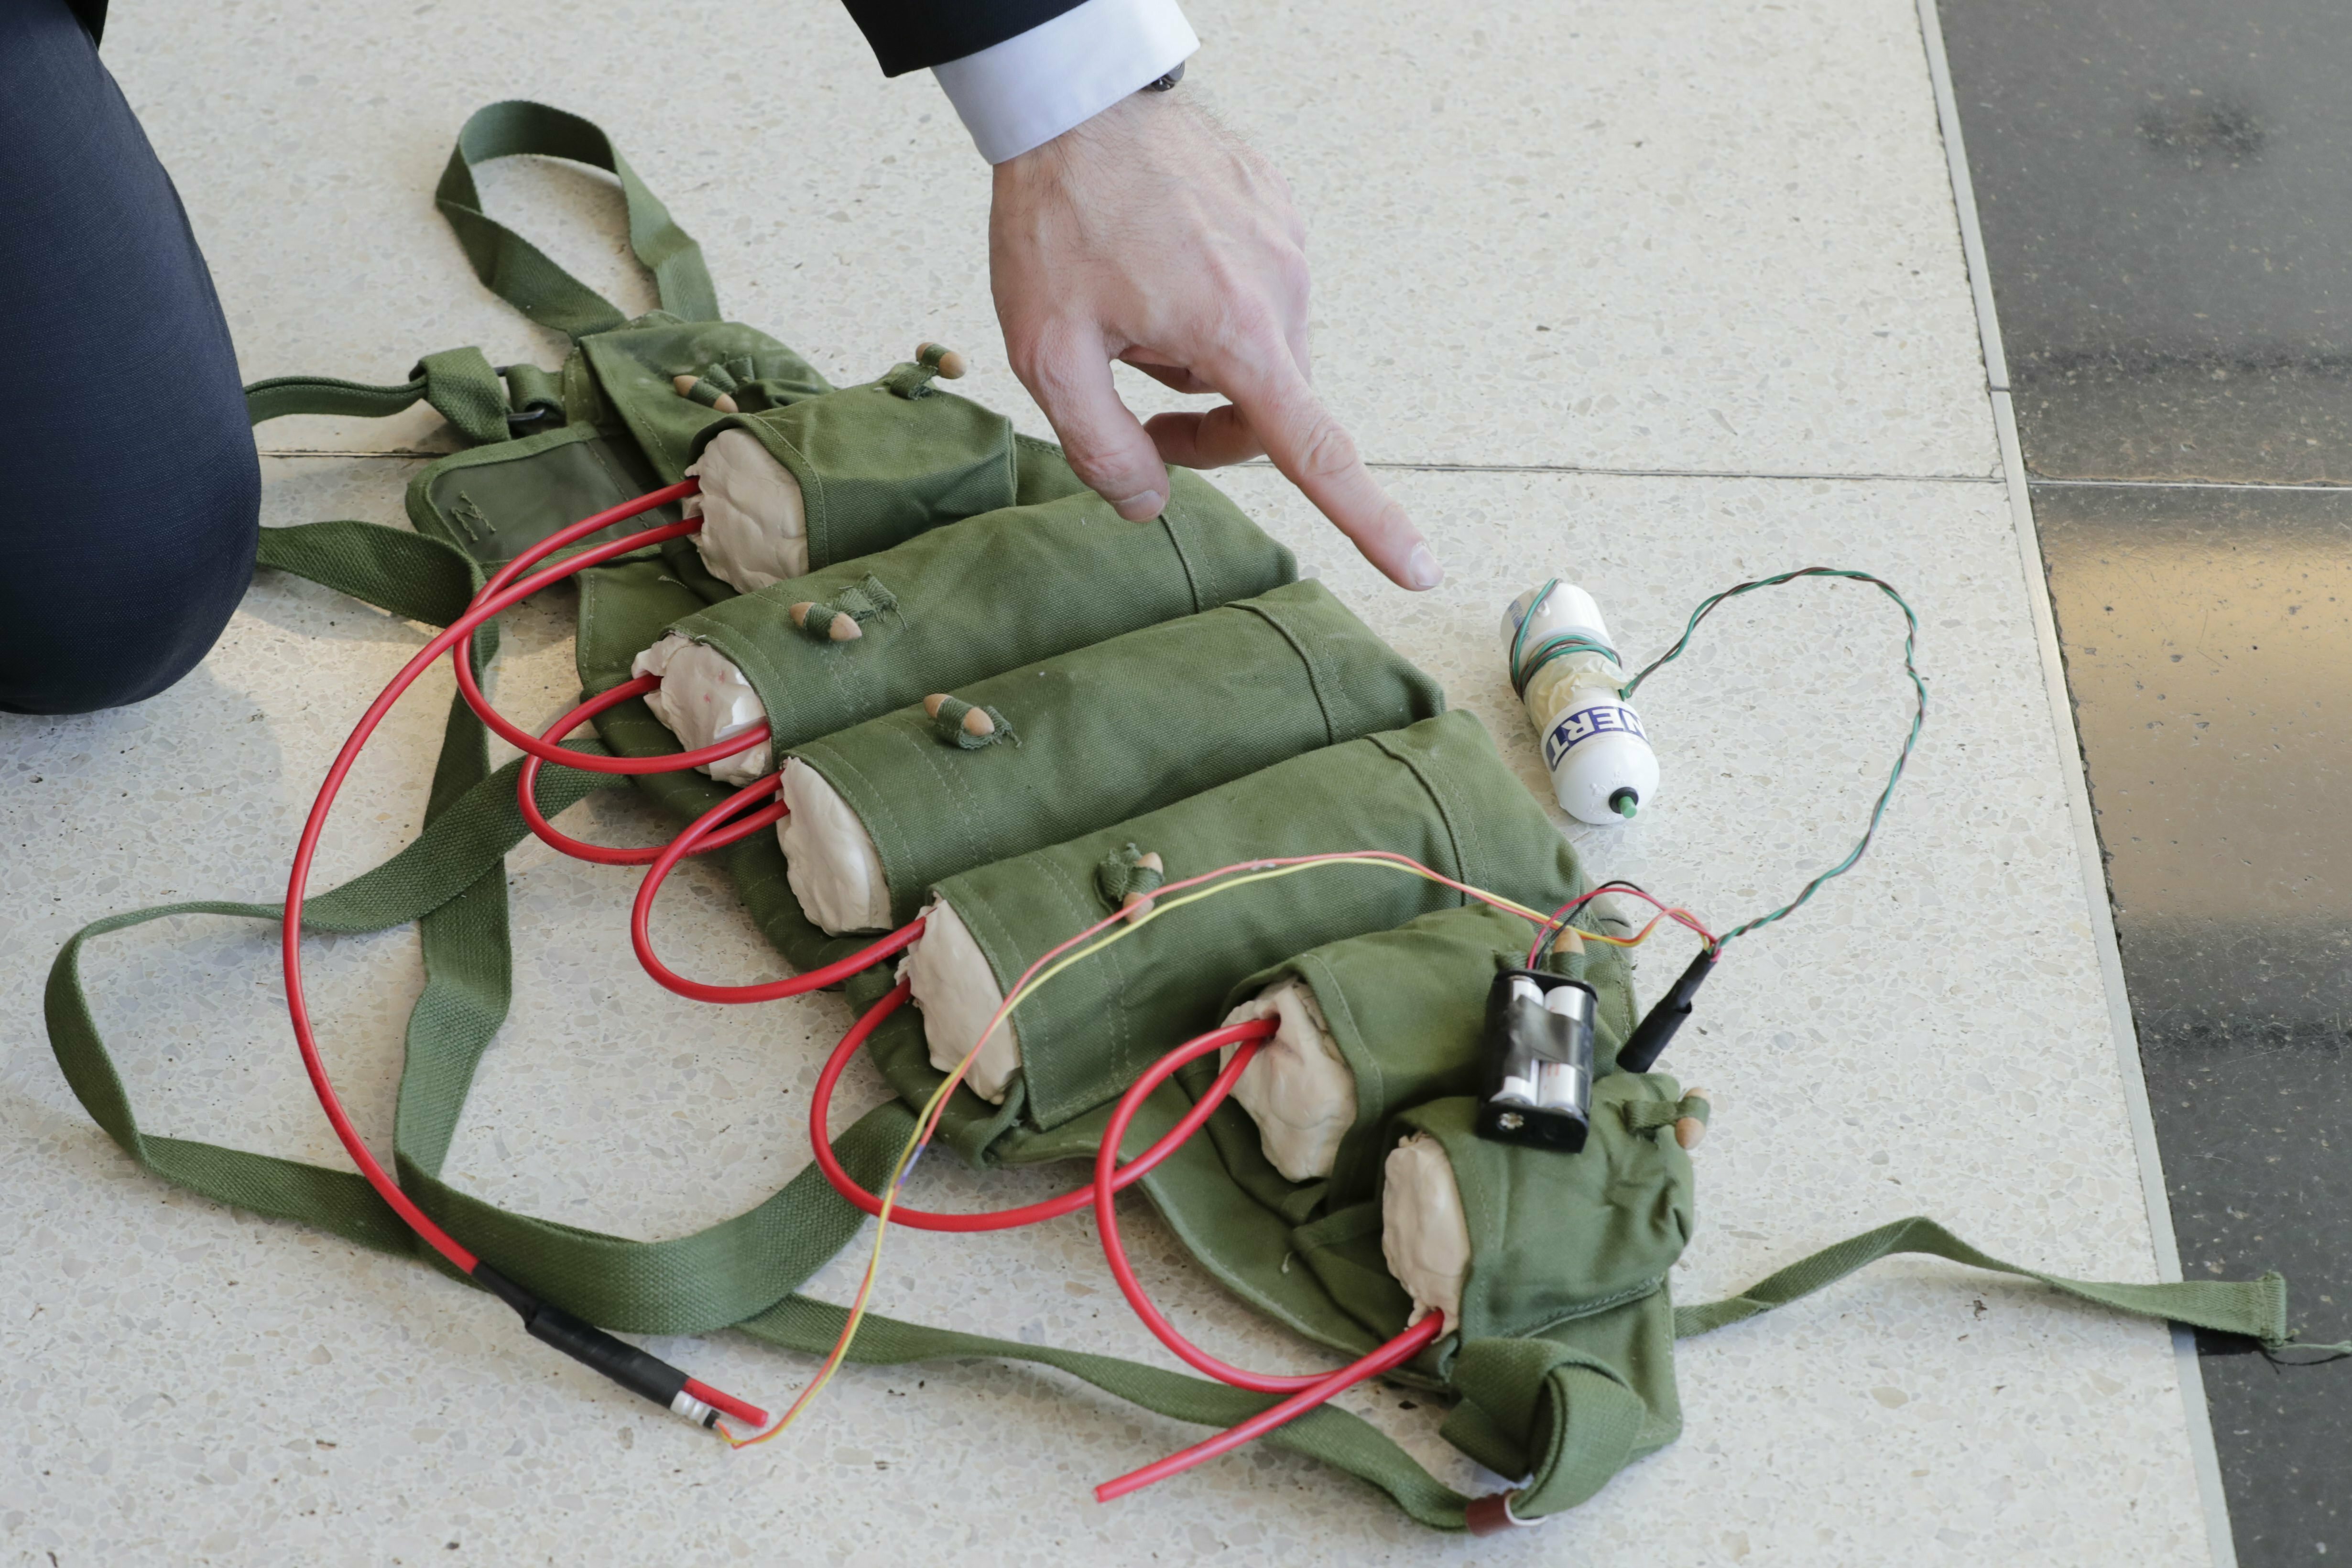 United Nations, New York, USA, April 04, 2019 - Improvised explosive device (IED) today at the UN Headquarters in New York for the International Mine Awareness Day 2019. Photo by: Luiz Rampelotto/EuropaNewswire/picture-alliance/dpa/AP Images